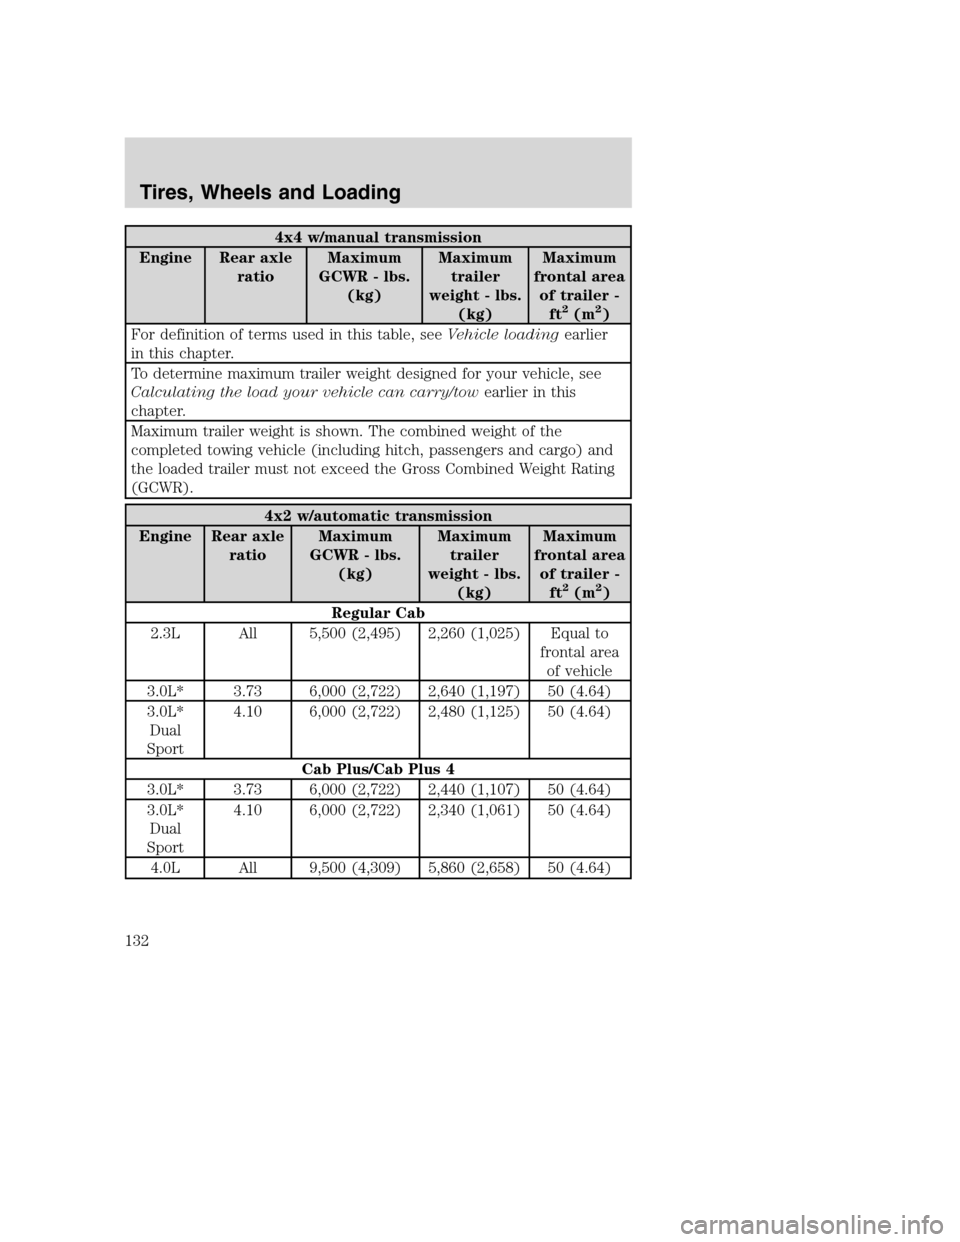 MAZDA MODEL B-SERIES 2005  Owners Manual (in English) 4x4 w/manual transmission
Engine Rear axle
ratioMaximum
GCWR - lbs.
(kg)Maximum
trailer
weight - lbs.
(kg)Maximum
frontal area
of trailer -
ft
2(m2)
For definition of terms used in this table, seeVehi